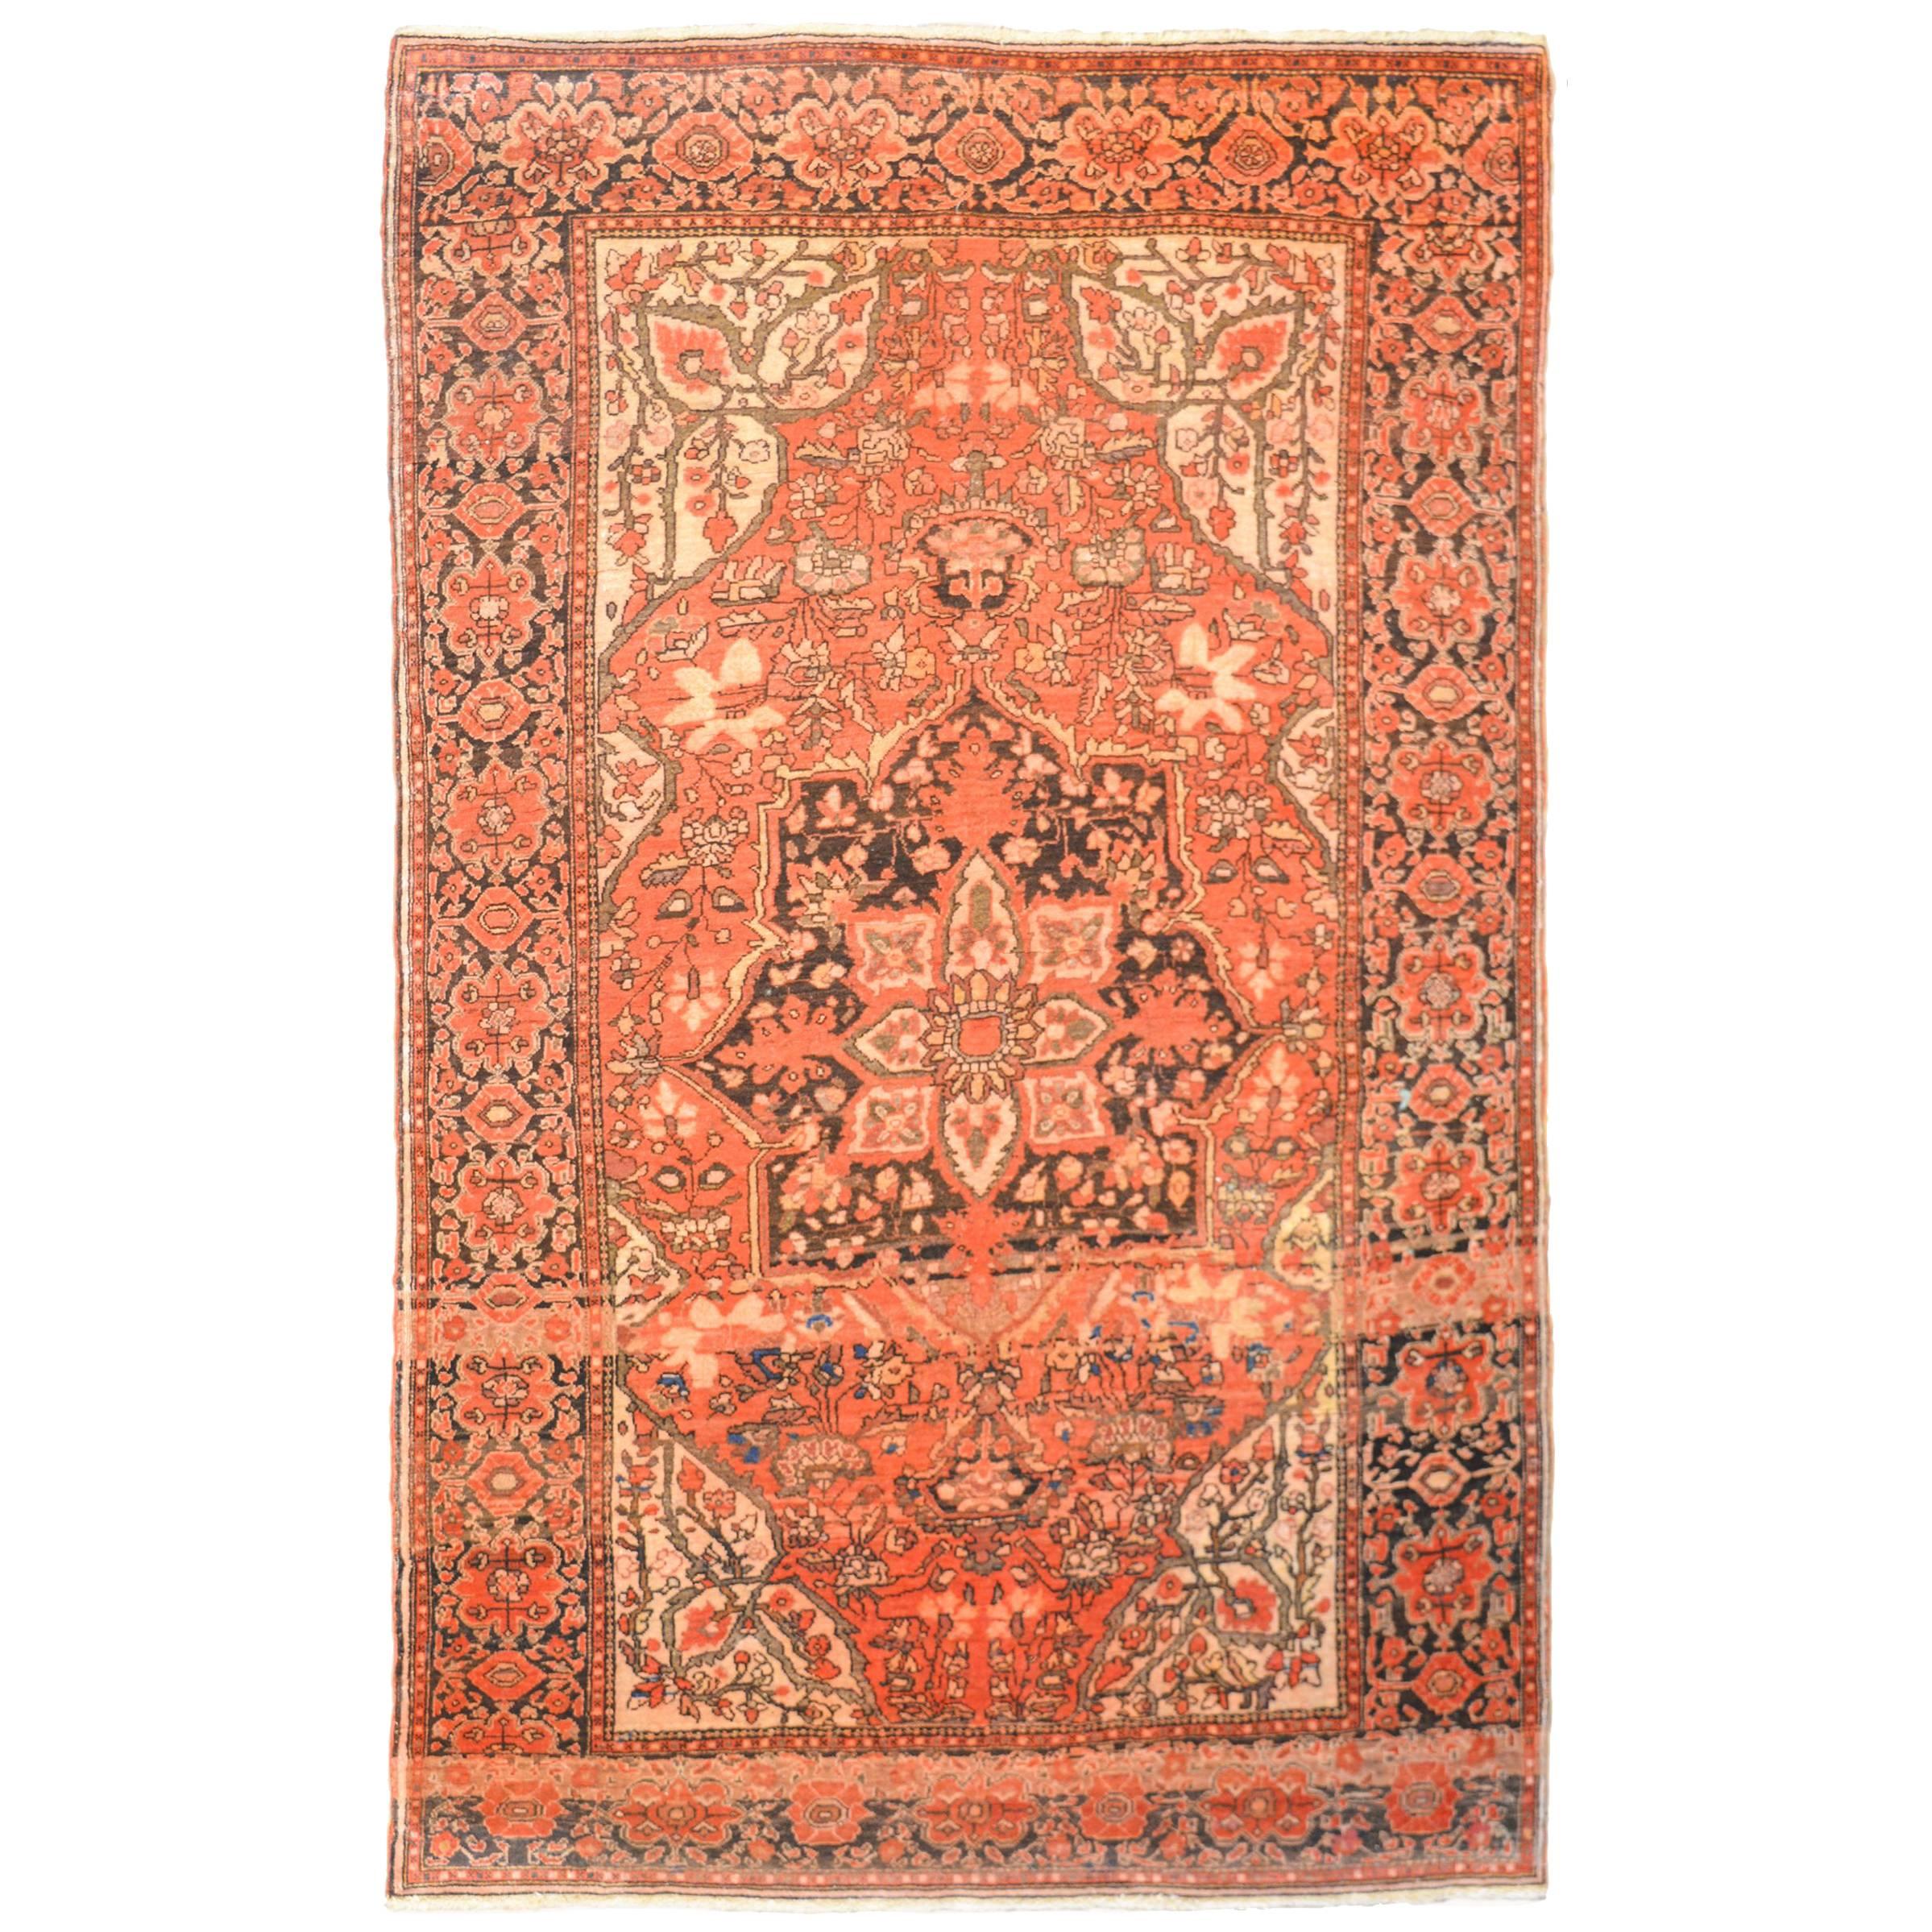 Unique Early 20th Century Sarouk Farahan Rug For Sale